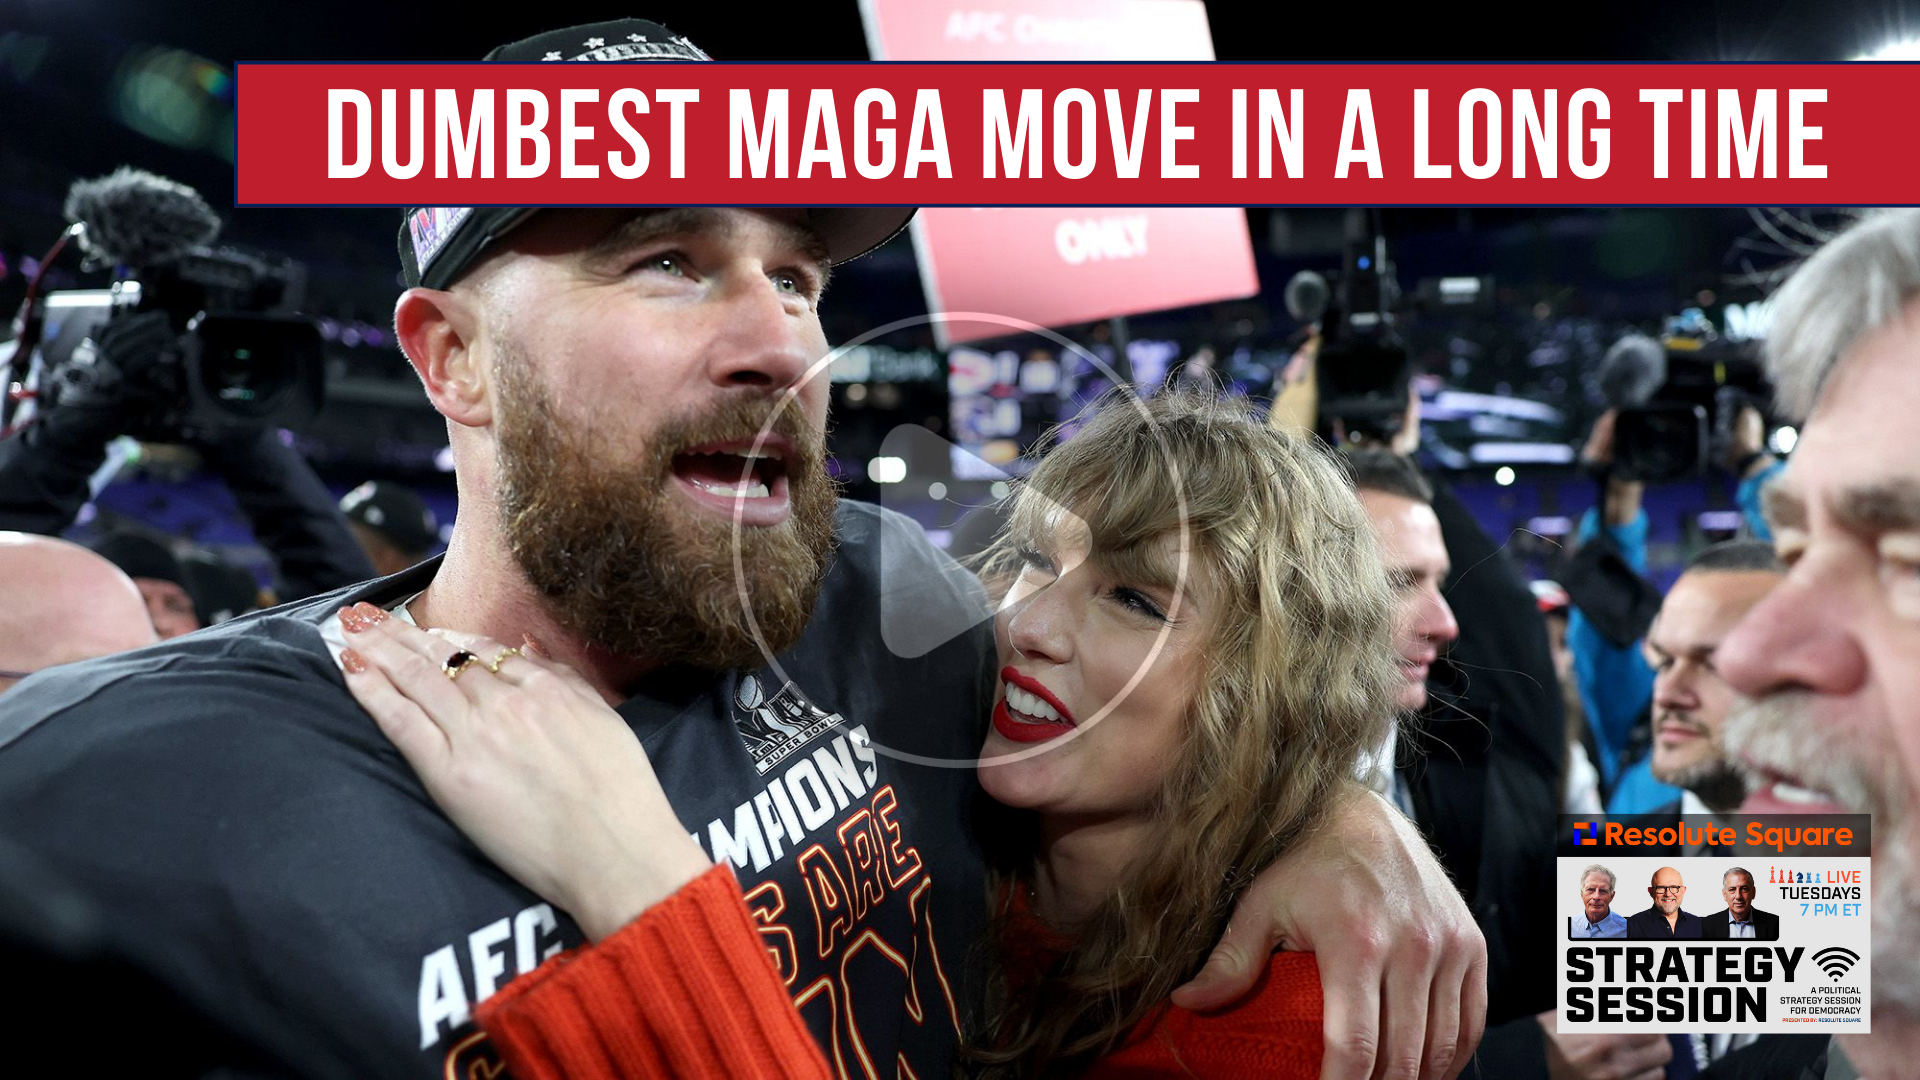 Dumbest MAGA Move: Attack Taylor Swift